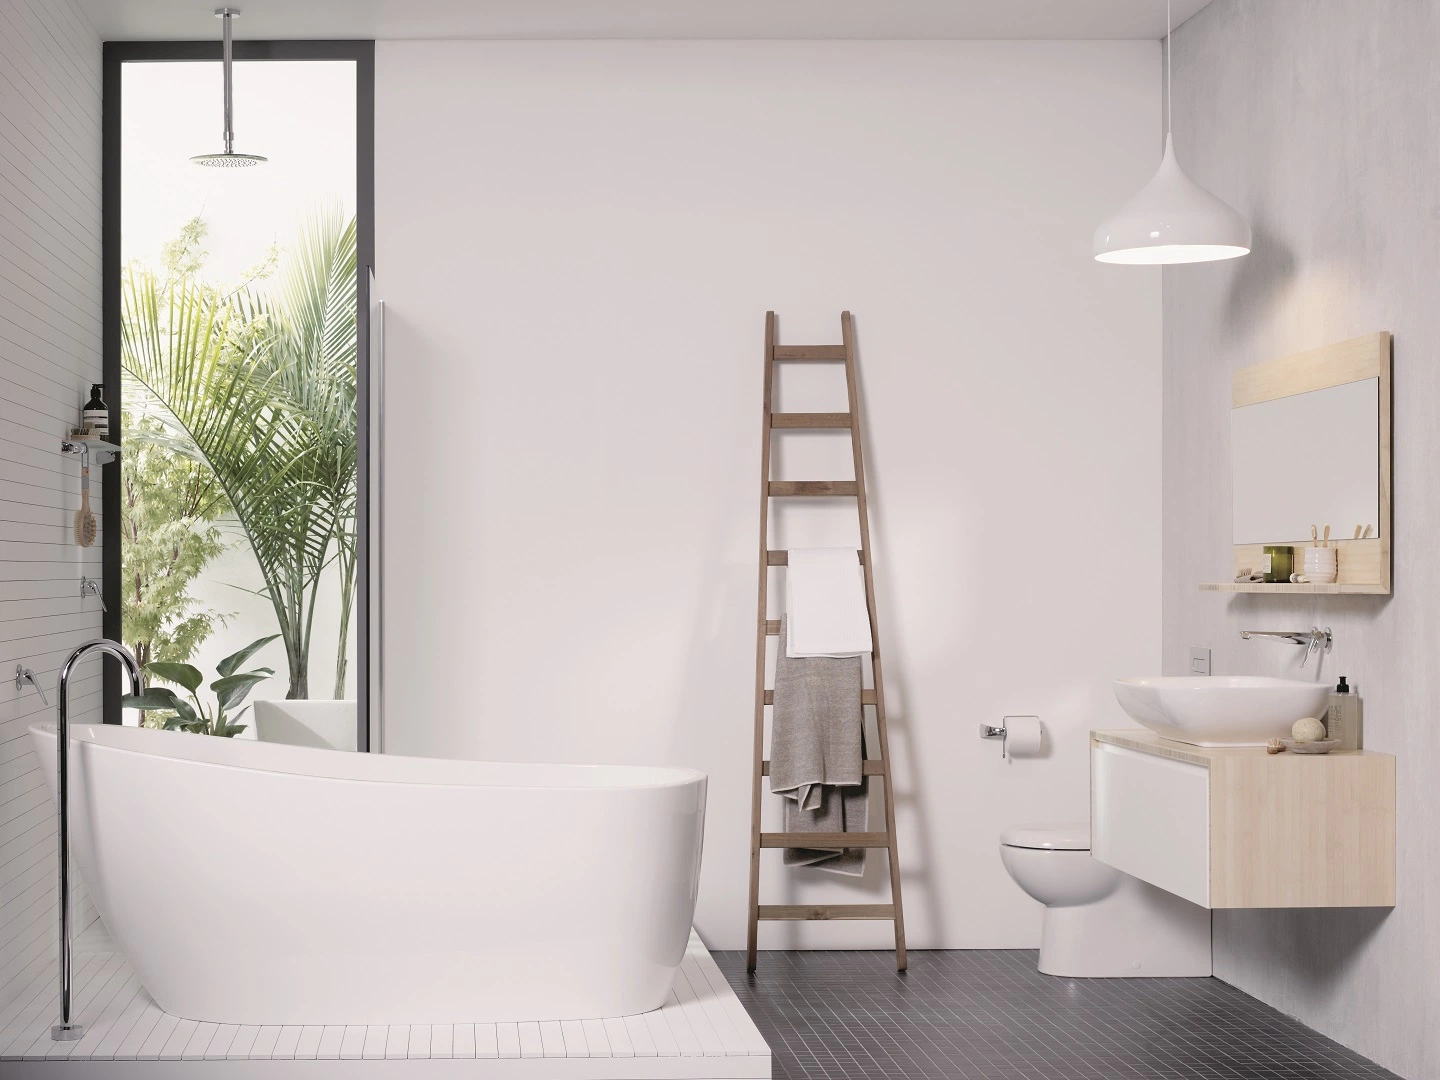 Some of The Benefits of Using Bathroom Accessories for Small Bathroom